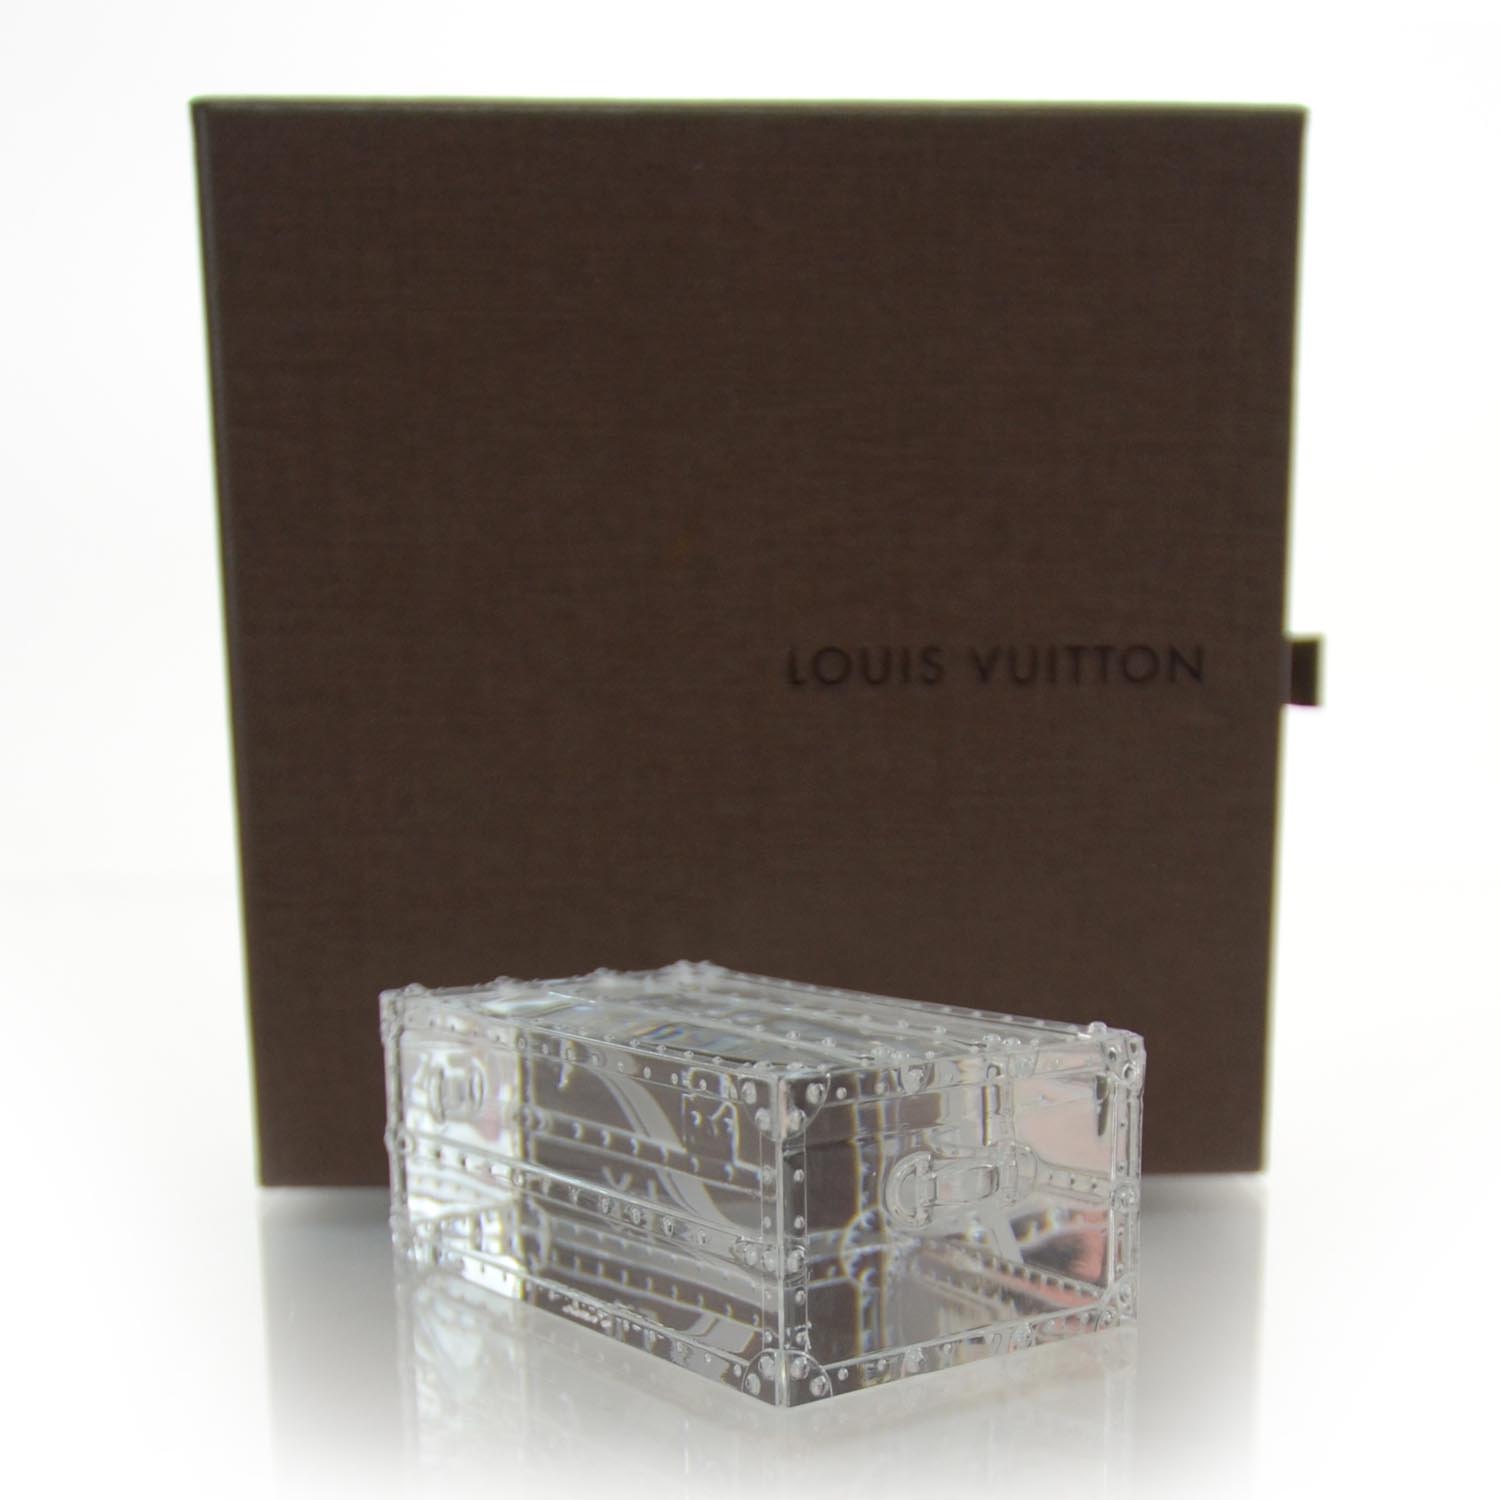 LOUIS VUITTON Crystal Trunk Paperweight 35842